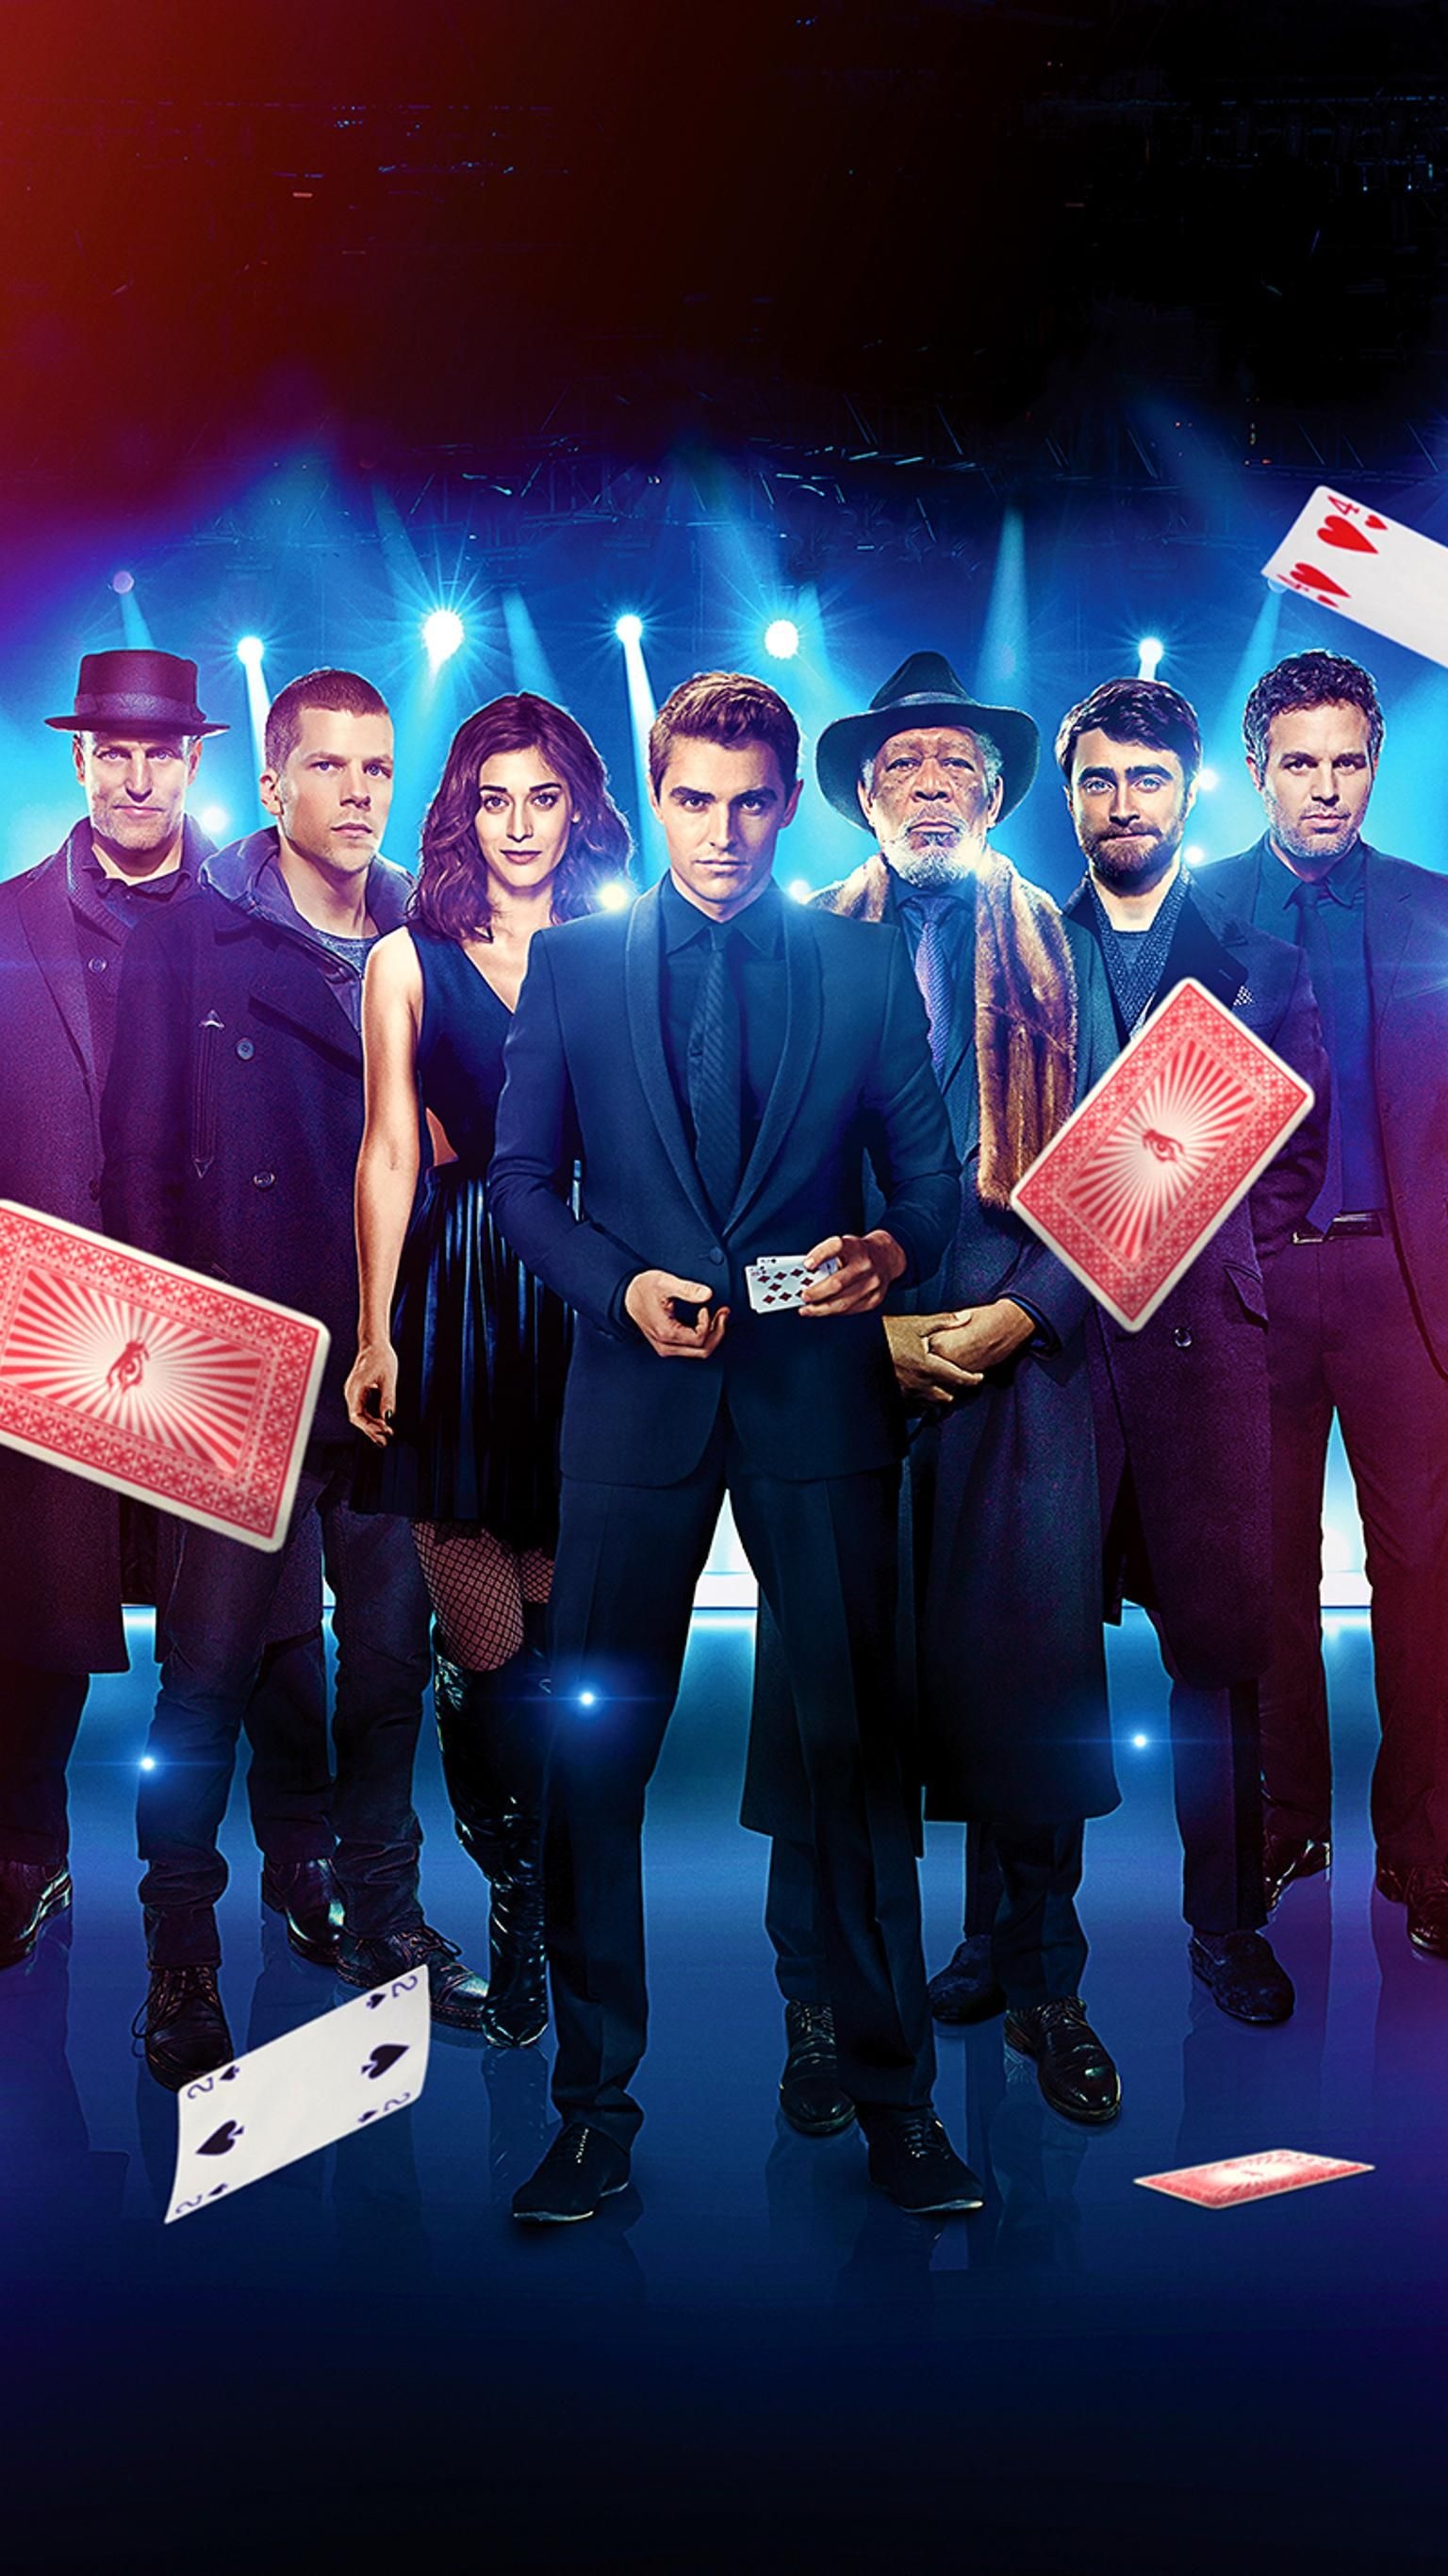 Phone wallpaper, Now You See Me 2, MovieMania app, Free movies online, 1540x2740 HD Handy